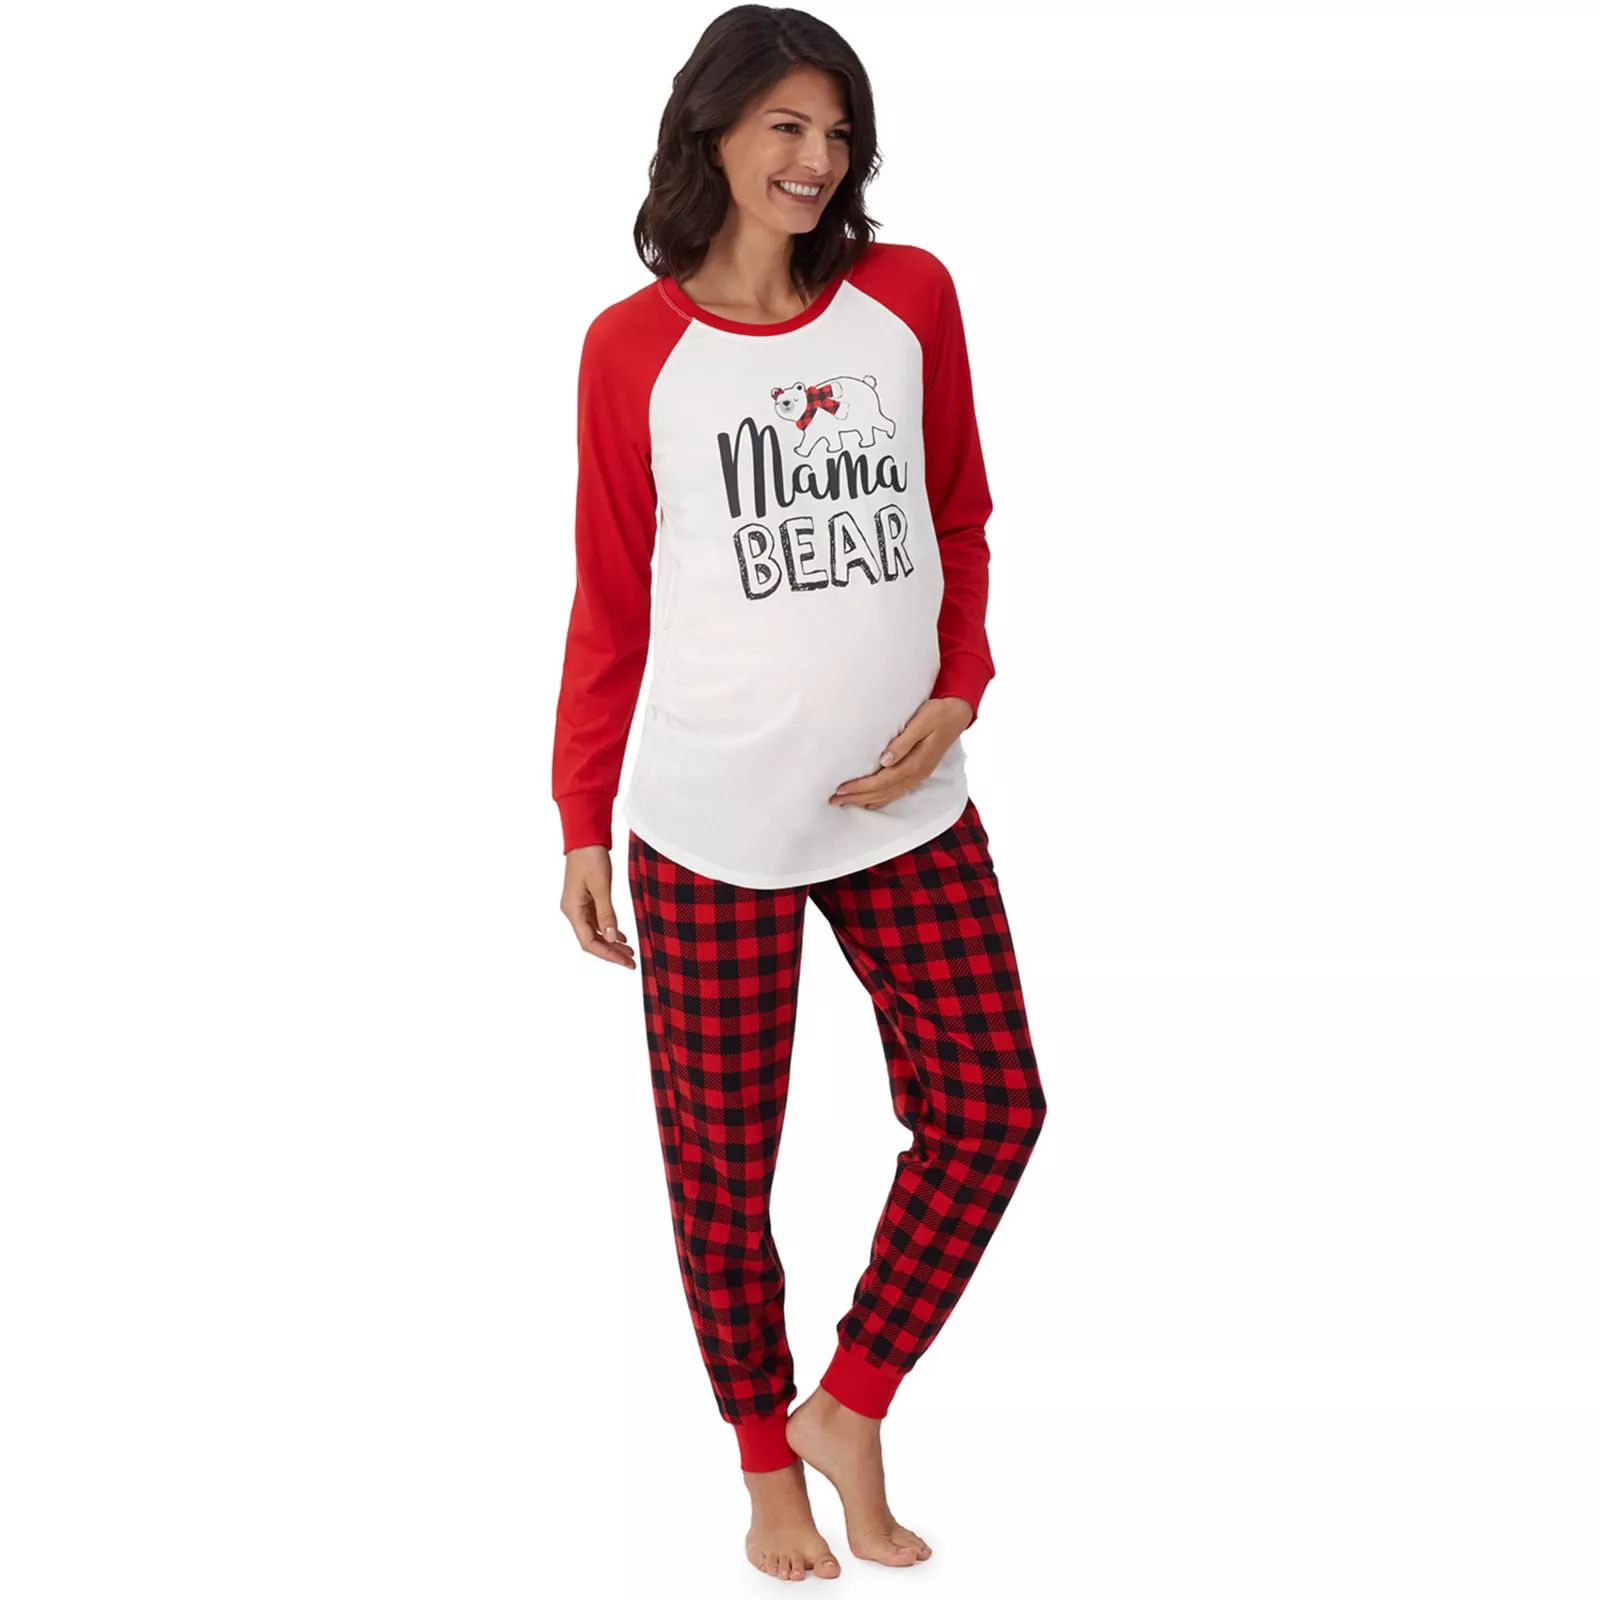 Maternity Jammies For Your Families Cool Bear Top & Plaid Pants Pajama Set by Cuddl Duds, Women's, S | Kohl's